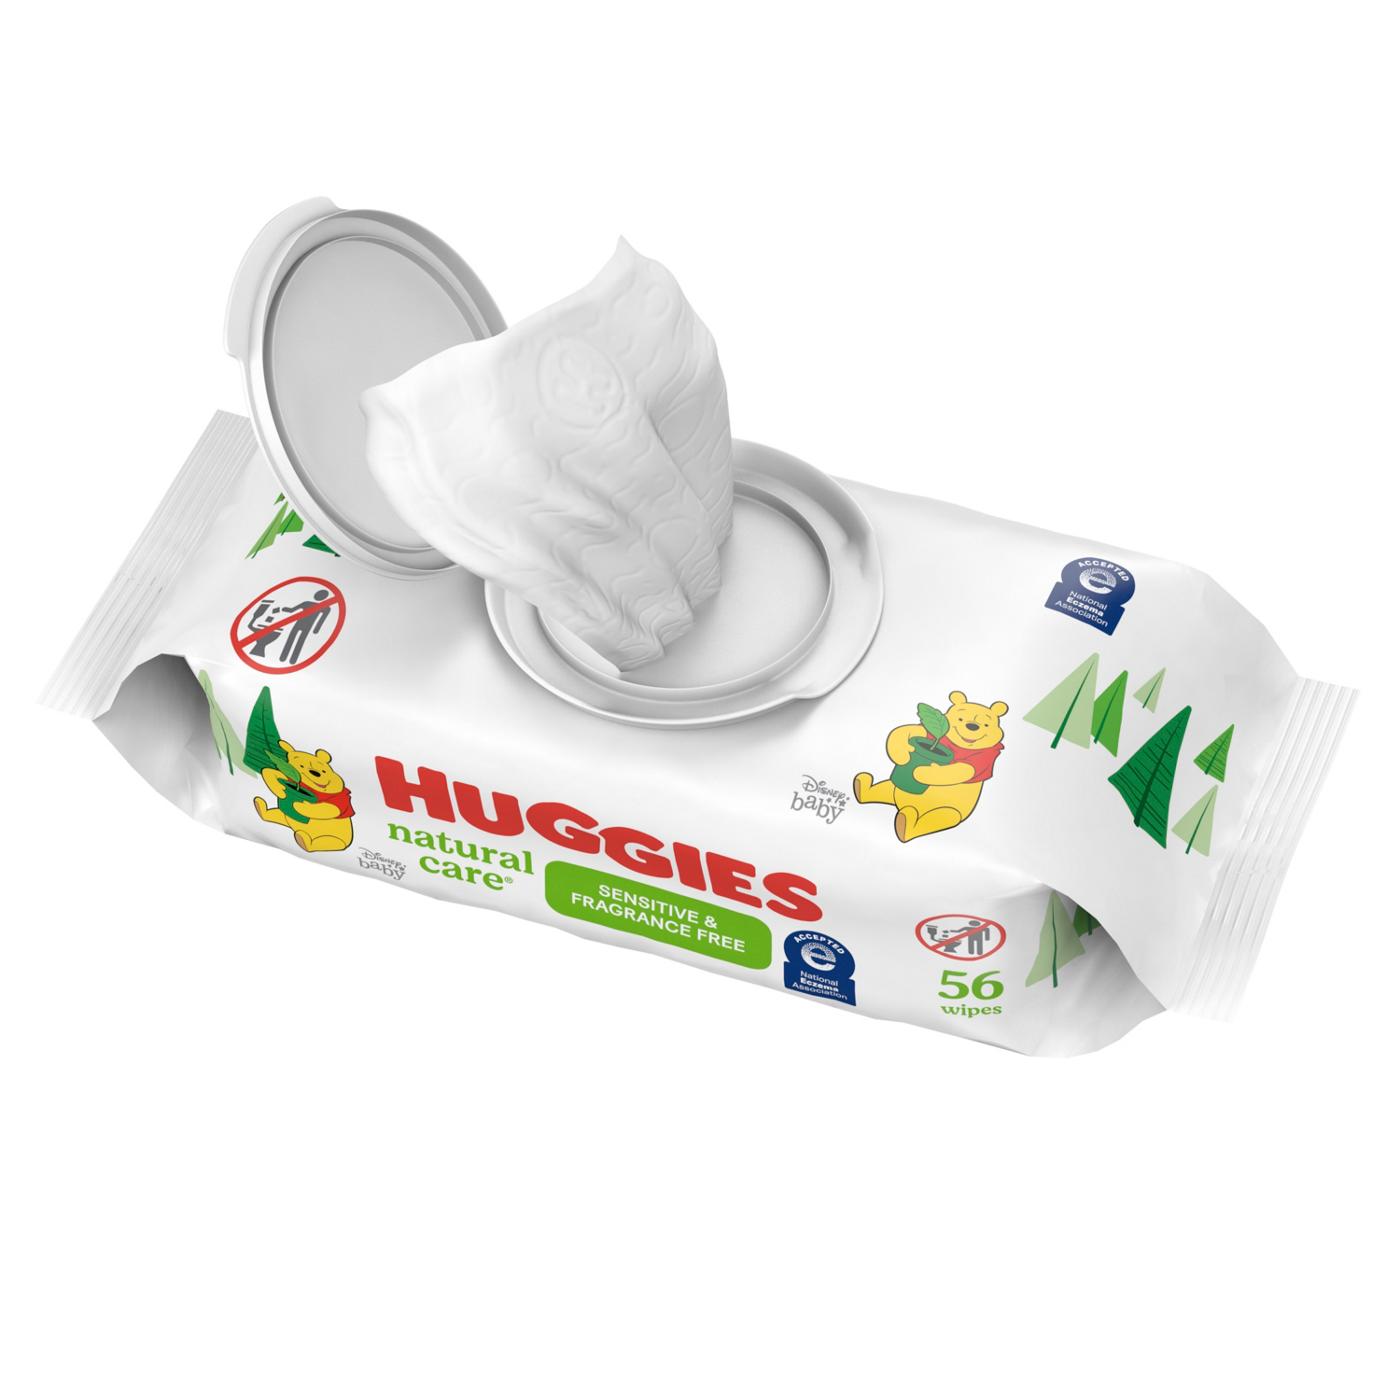 Huggies Natural Care Sensitive Baby Wipes - Fragrance Free; image 9 of 9